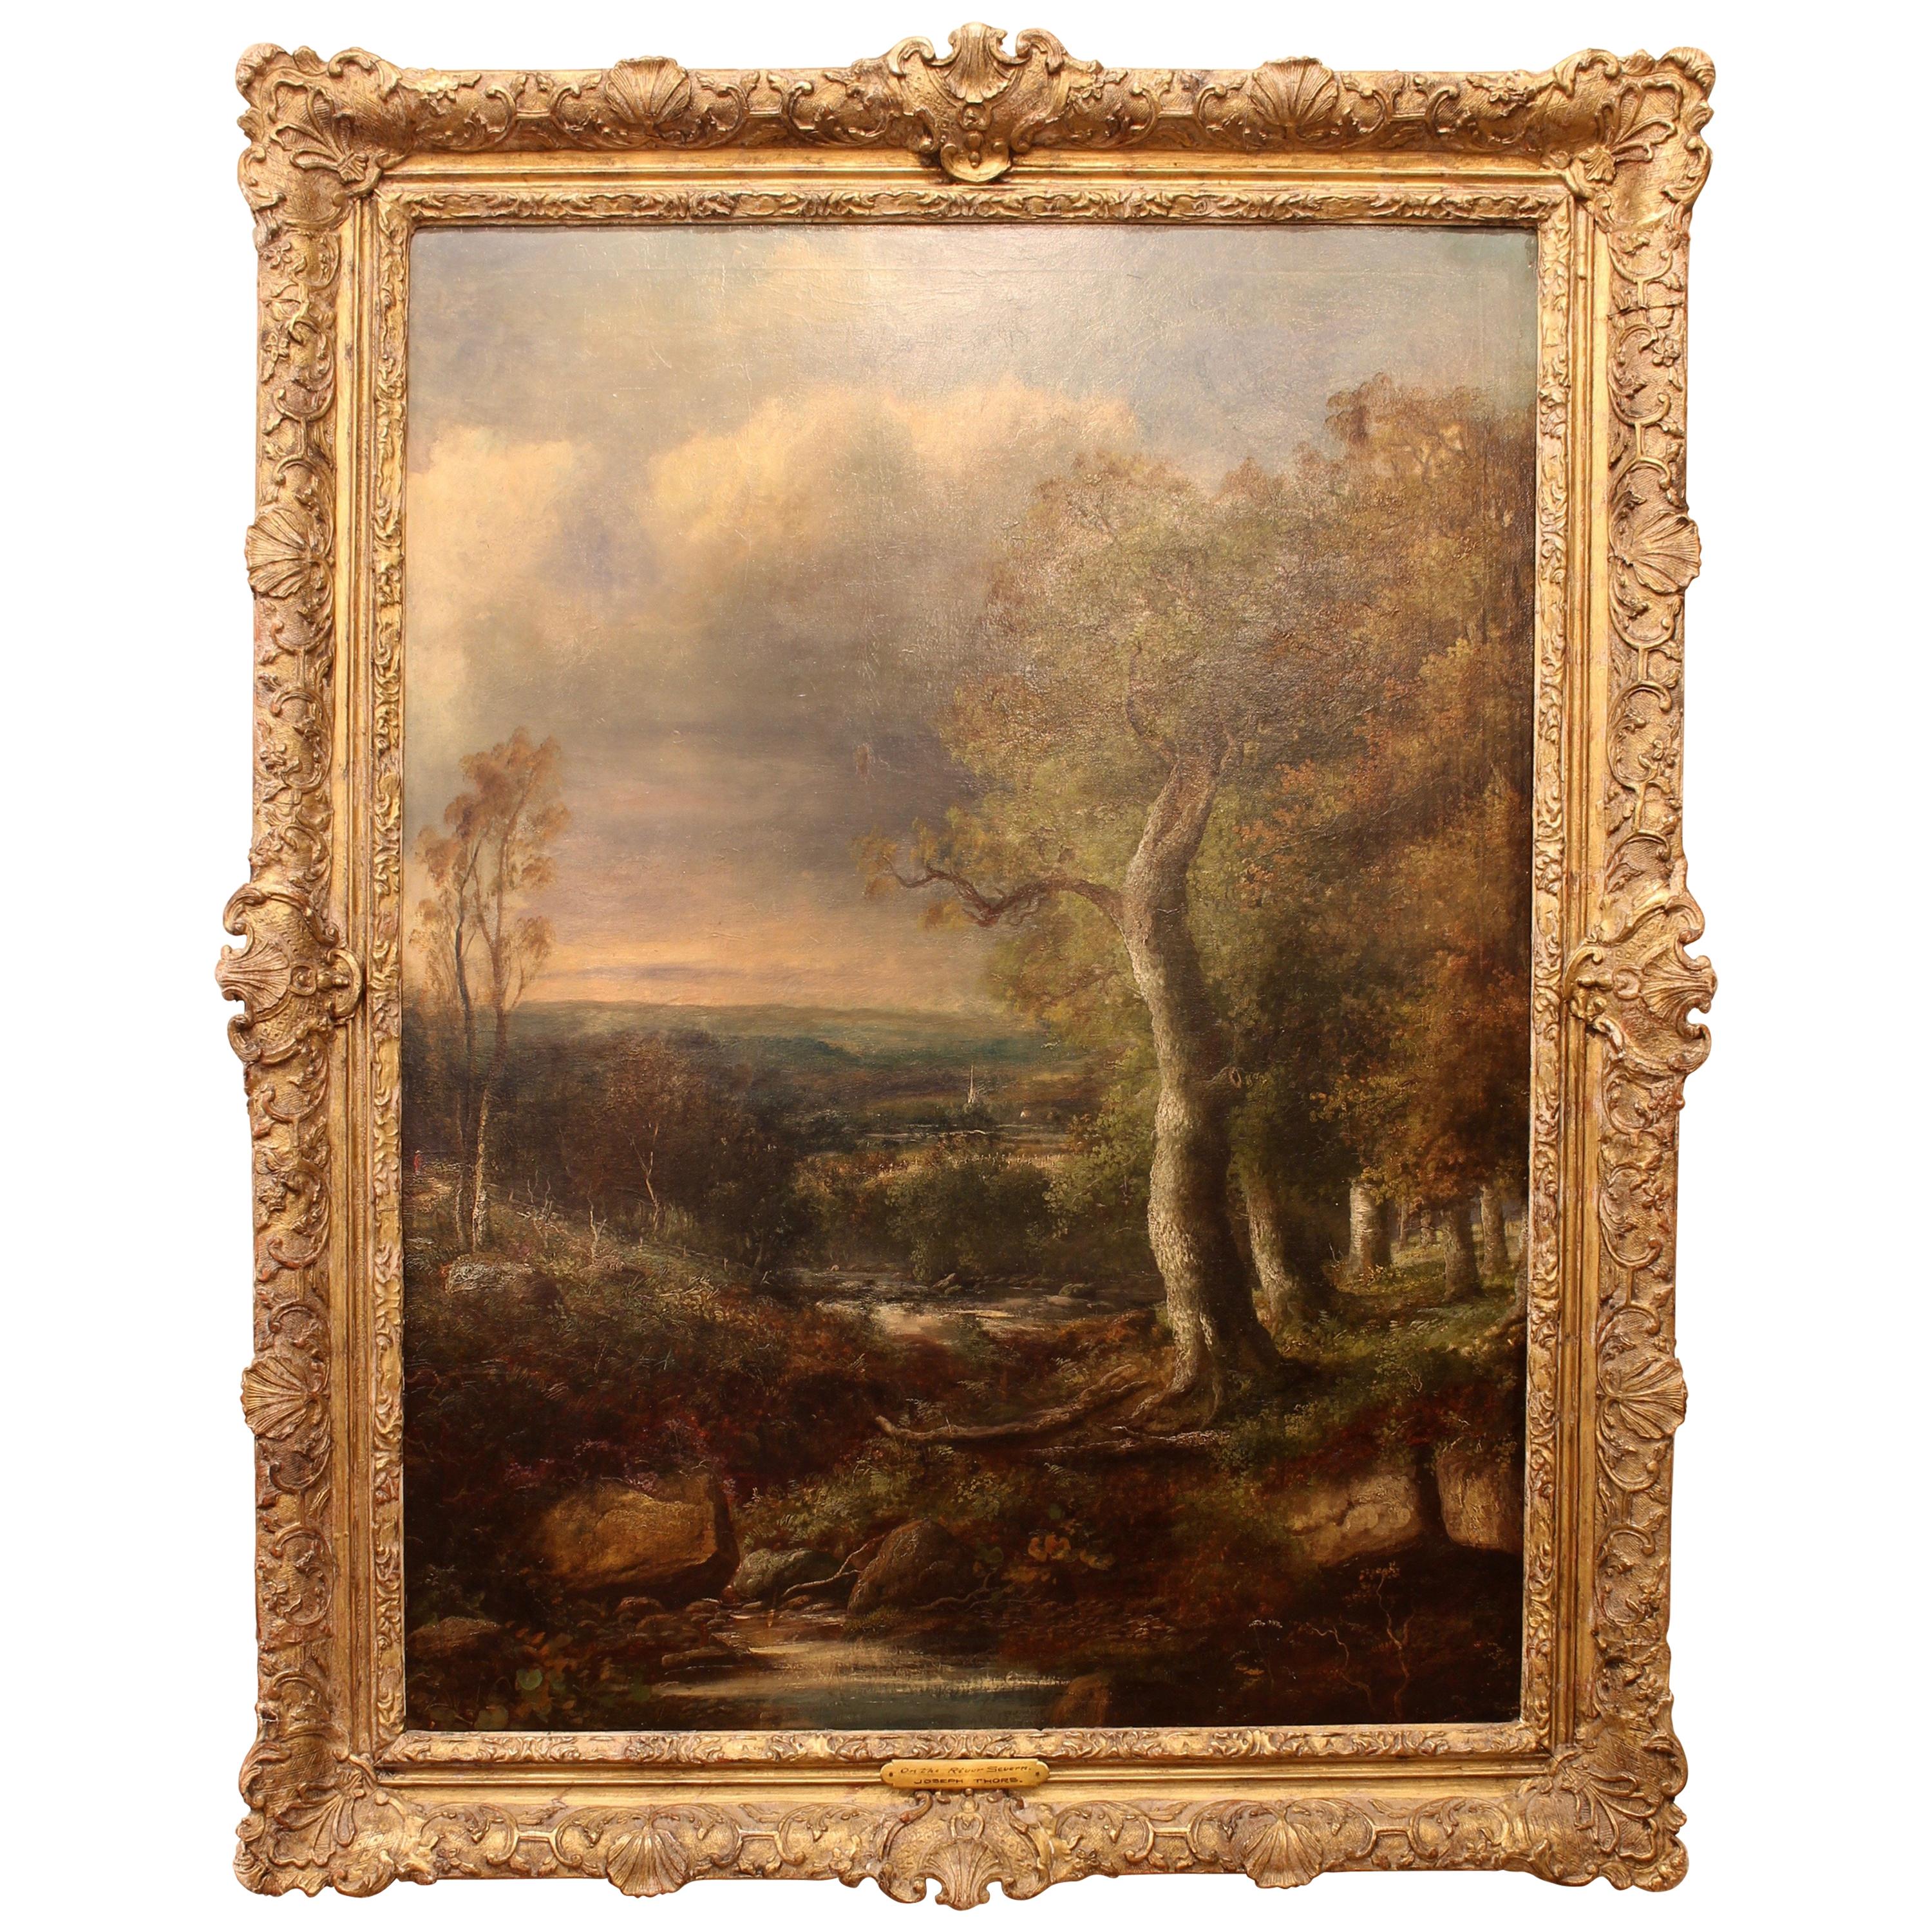 English Oil on Canvas Landscape Painting